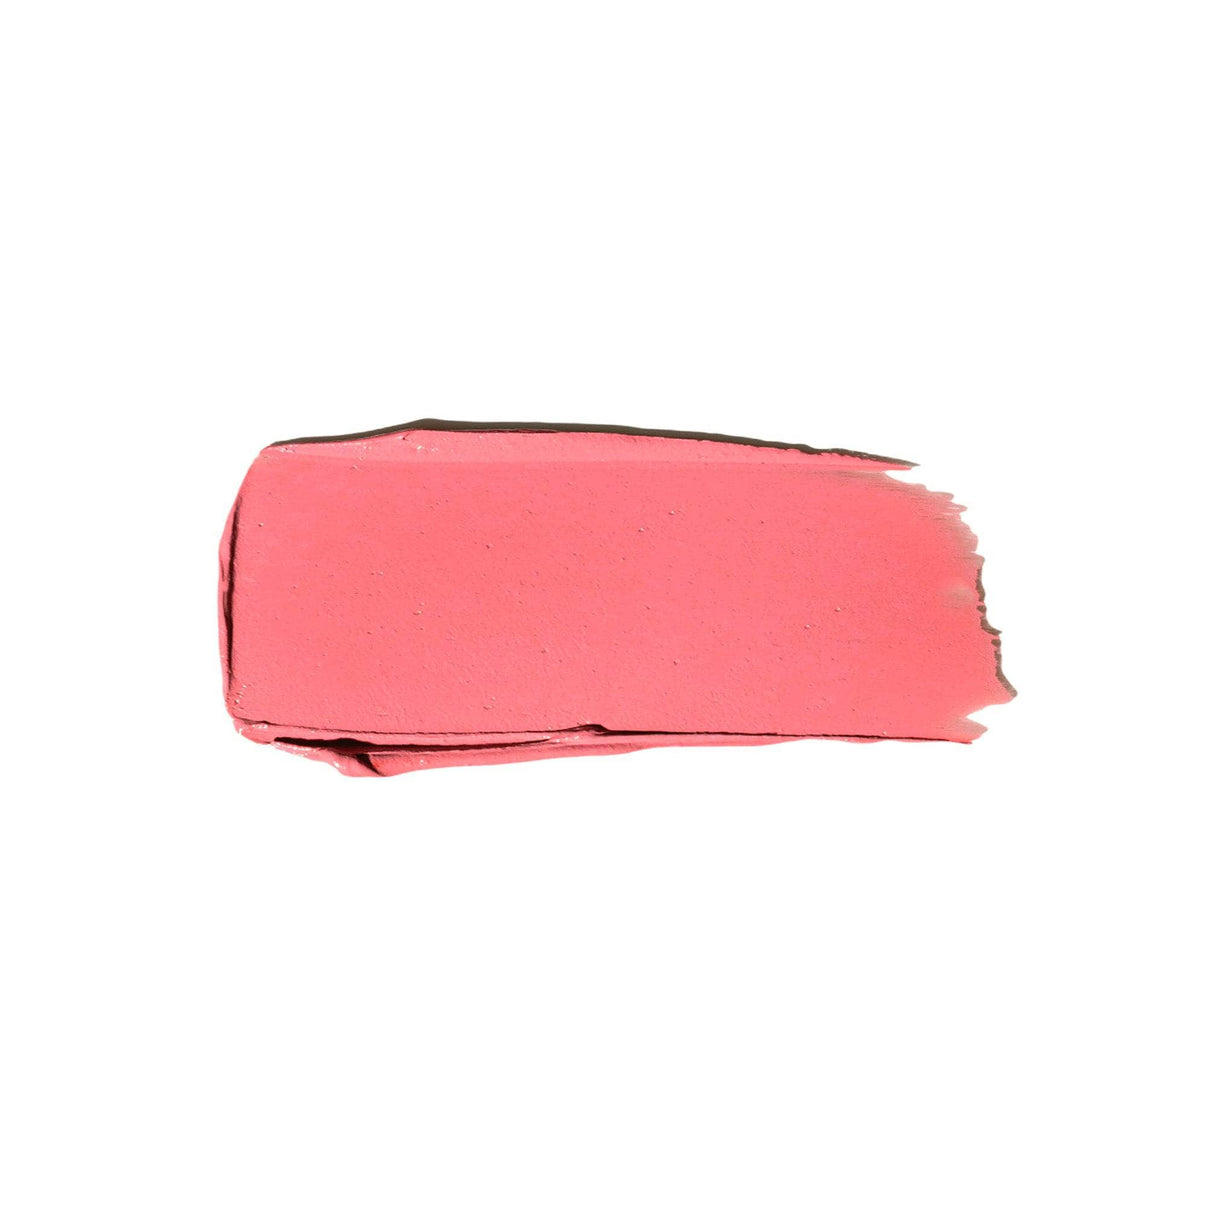 Texture swatch of Nudies Matte Lux Rosy Posy-5